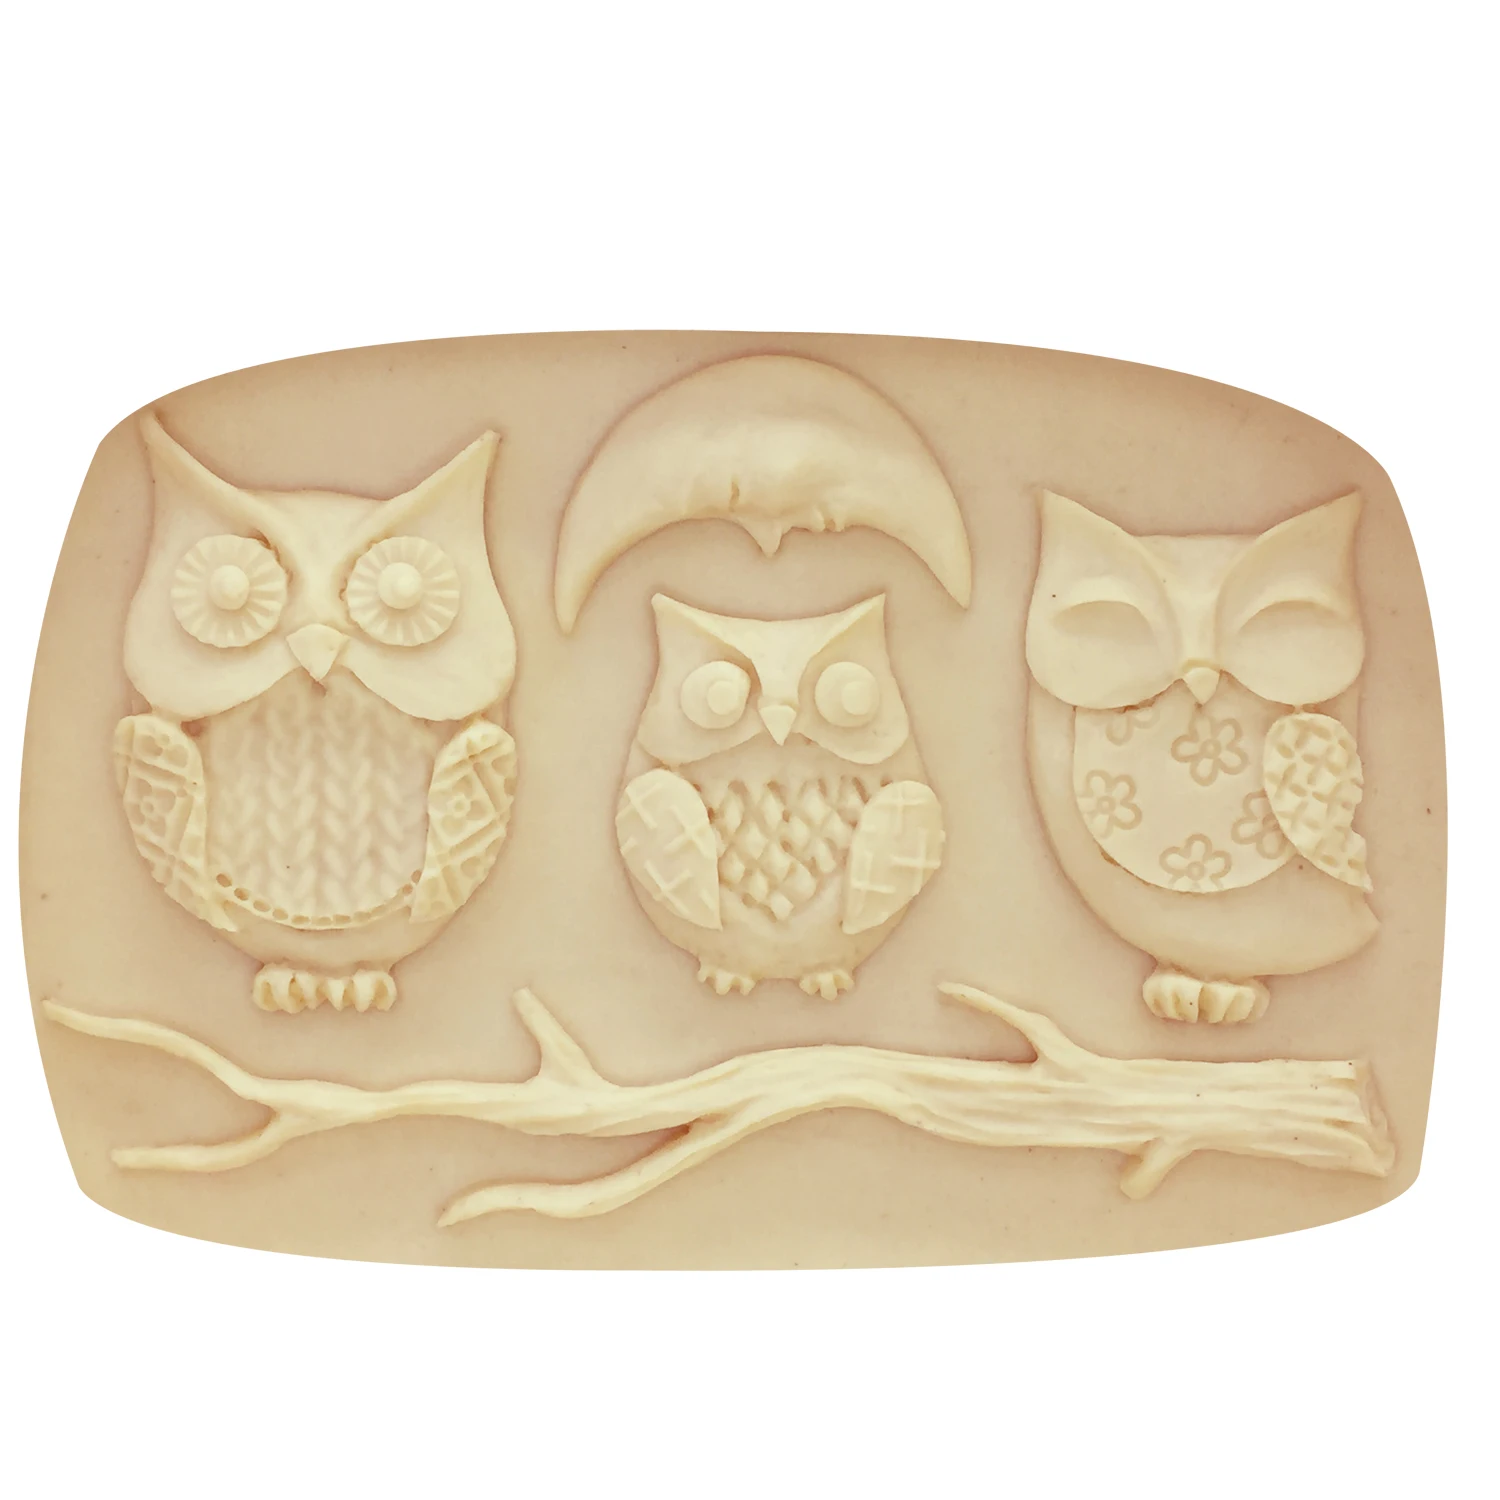 M0449 Owl Silicone Mold- Bird moon and Branch Mold Sugarcraft, Cake Decoration, Fondant, Gum Paste, Chocolate, Resin Mold